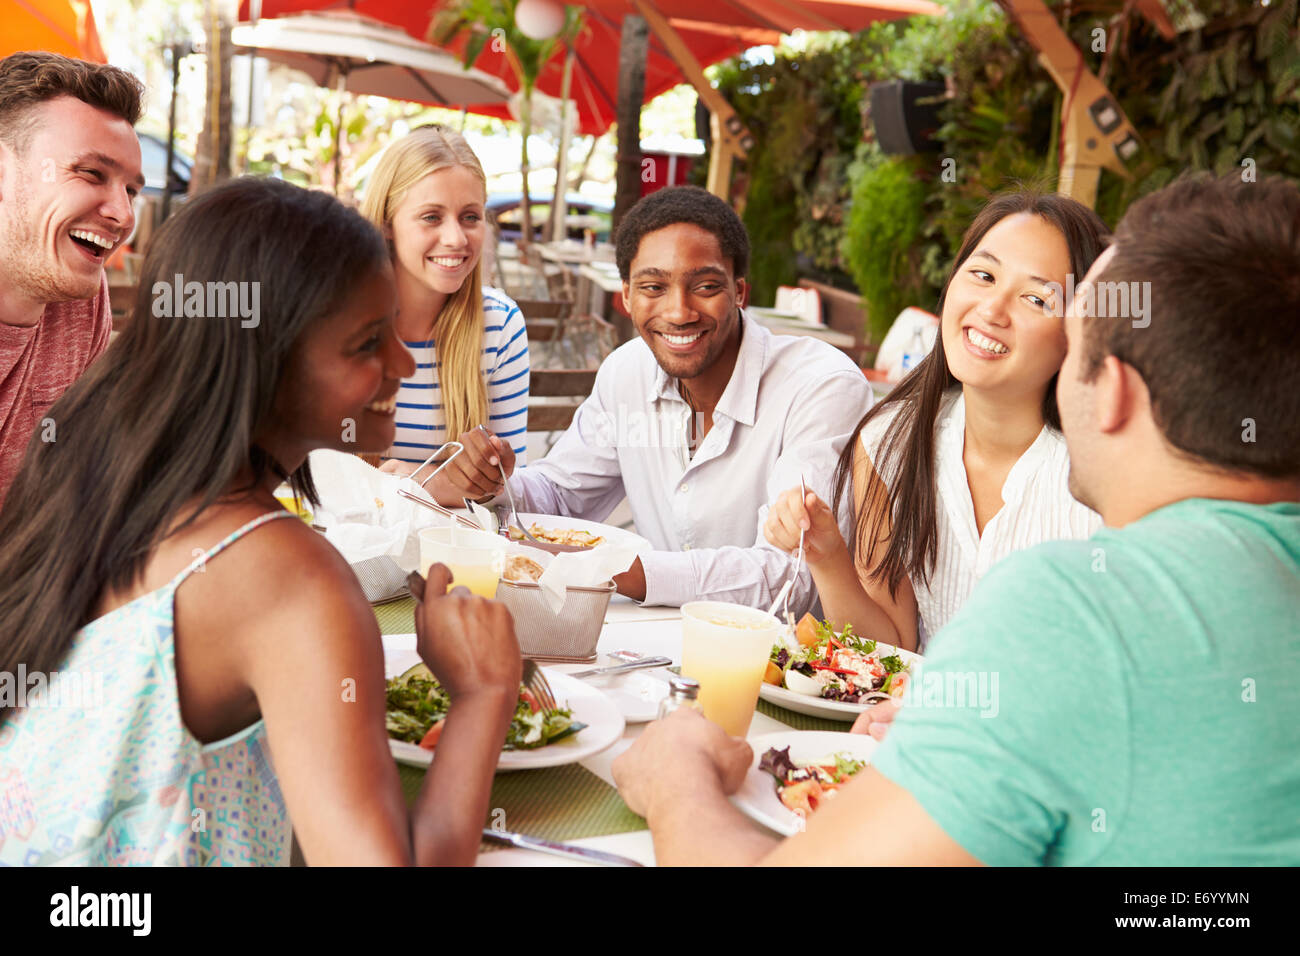 Group Of Friends Enjoying Lunch In Outdoor Restaurant Stock Photo